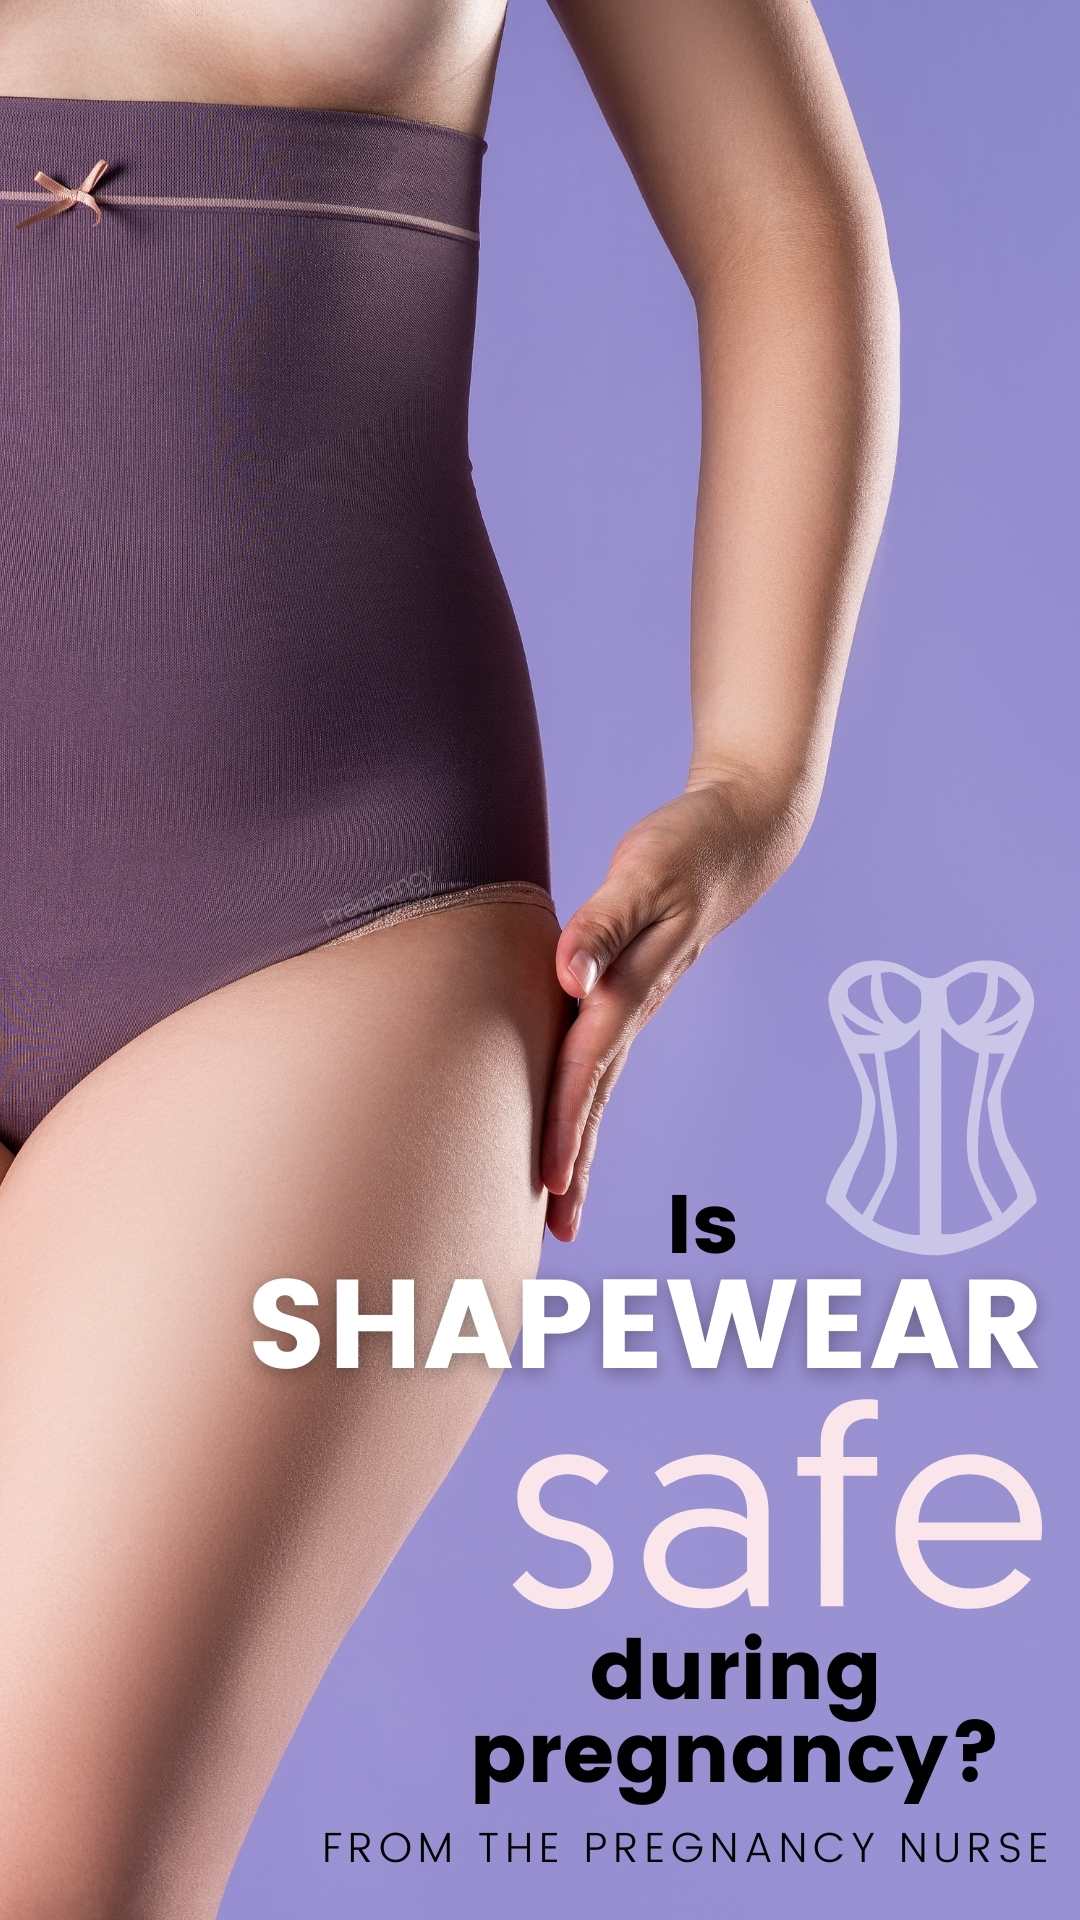 Maternity shapewear is available from brands like Spanx. Is it OK to wear shapewear or other slimming garments while pregnant? Let's find out what could happen.